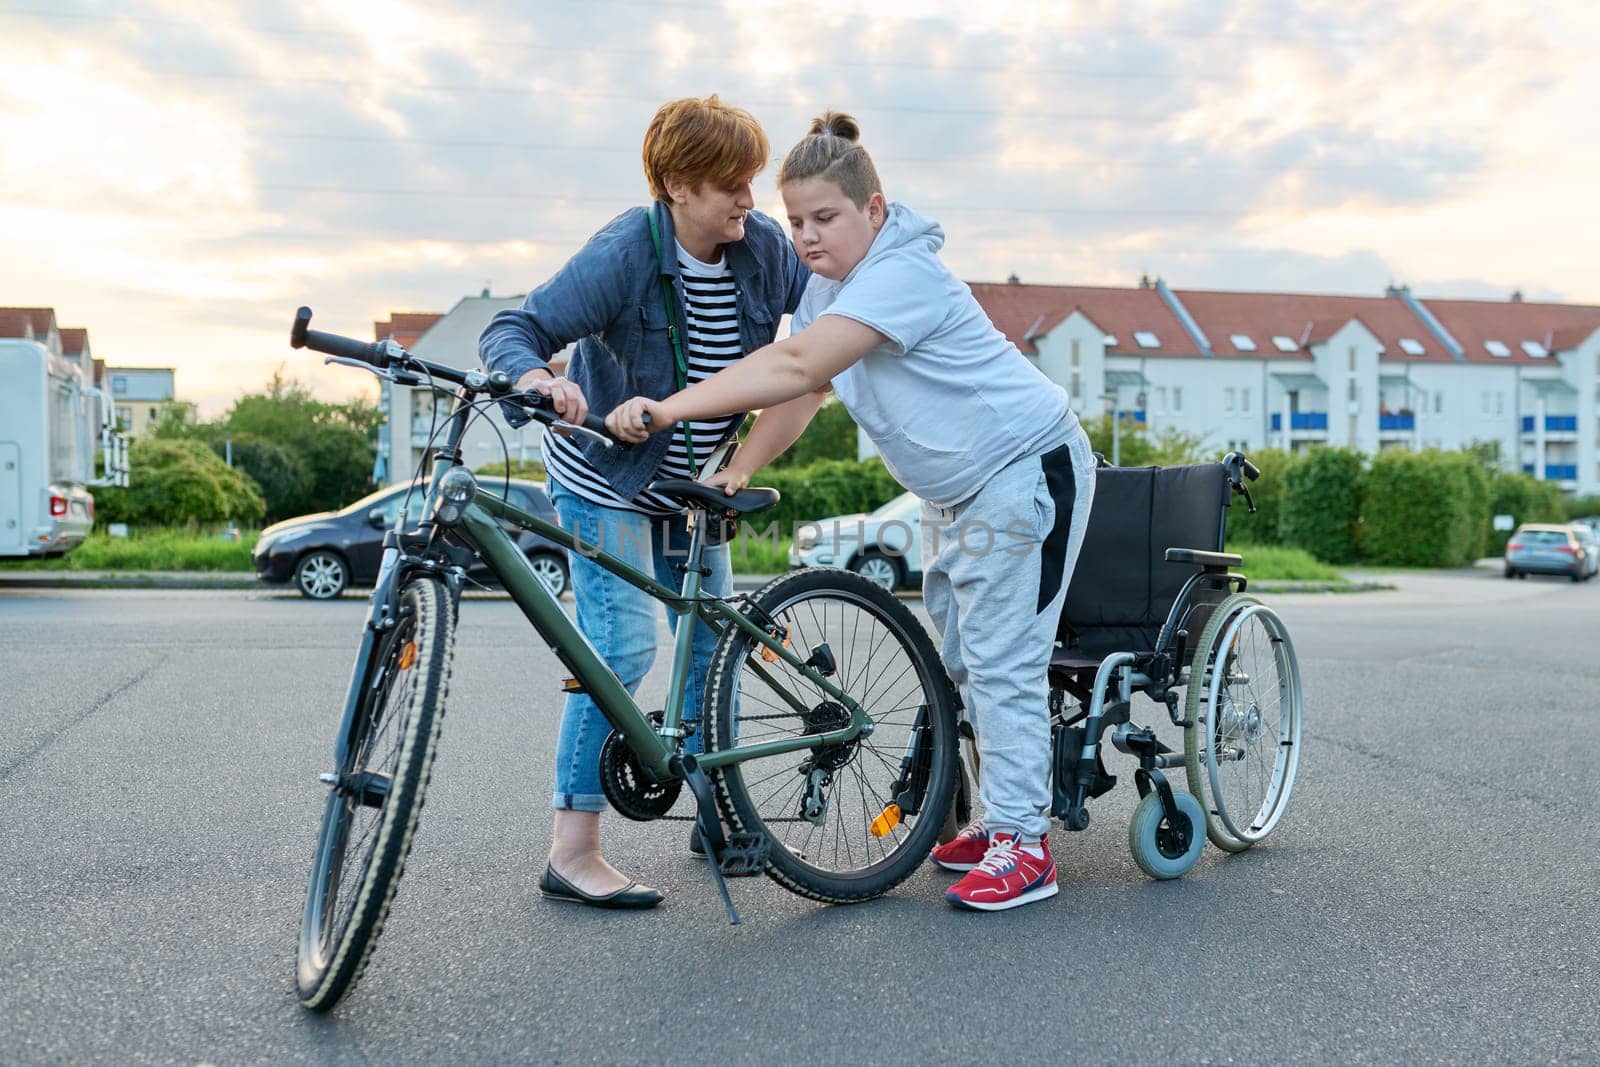 Boy transfers from wheelchair to bicycle, mother helping child to transfer, activity rehabilitation health concept